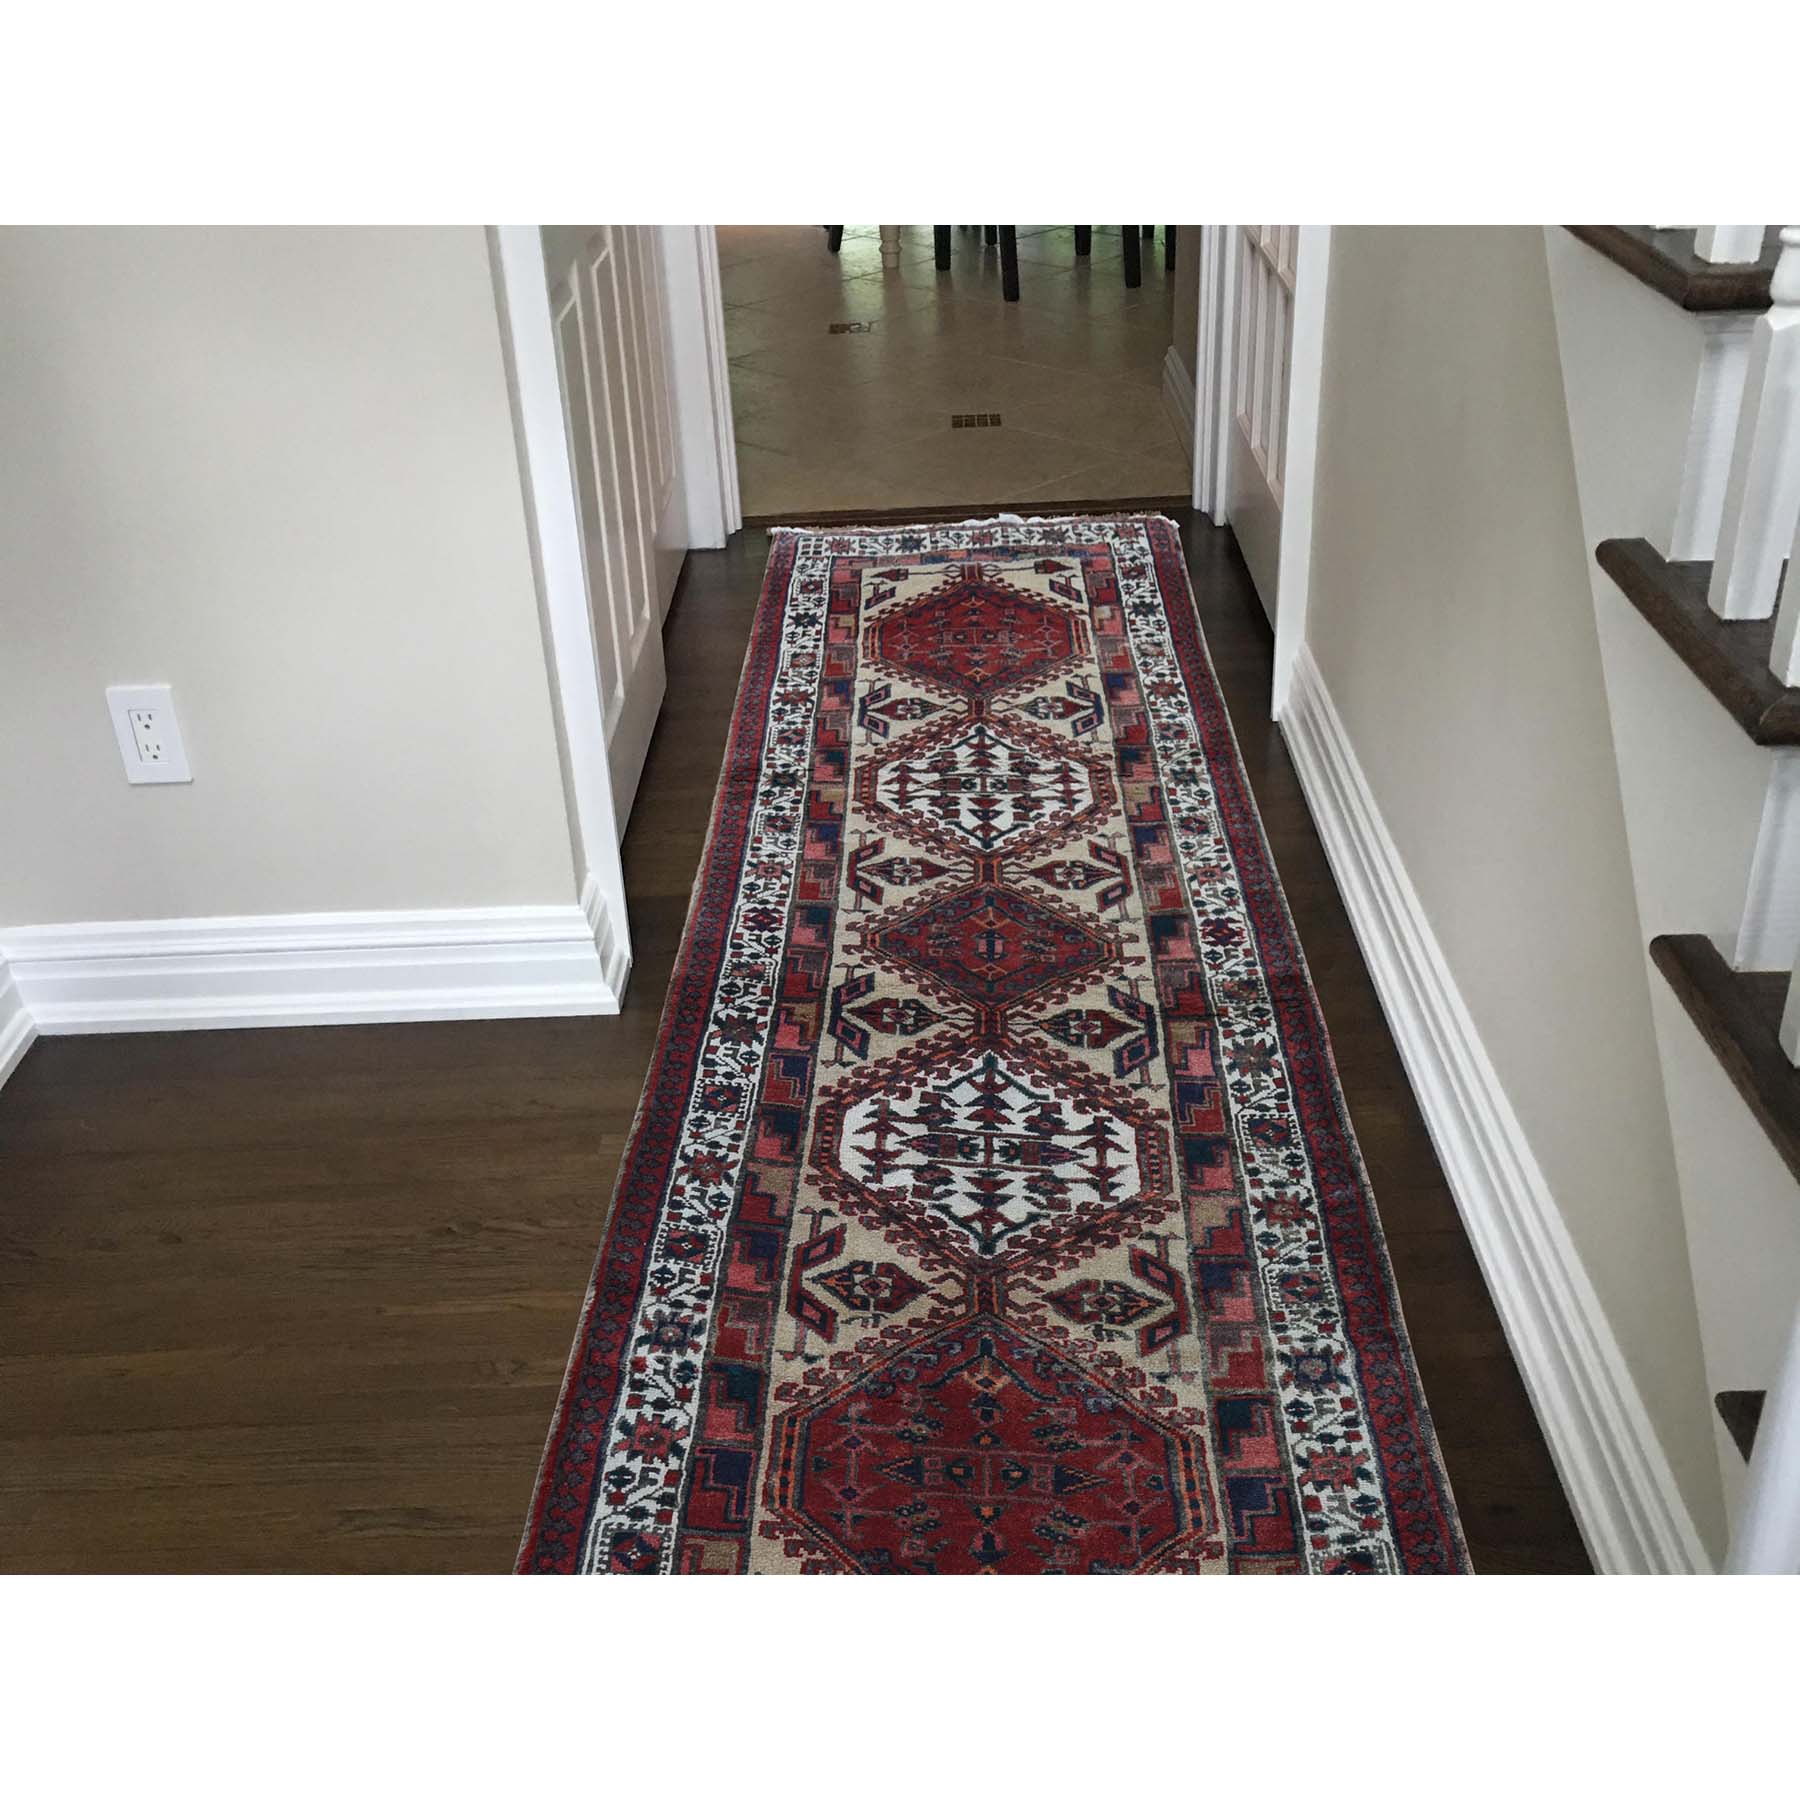 3-5 x10-5  Pure Wool Semi Antique Persian Serab Wide Runner Hand-Knotted Oriental Rug 